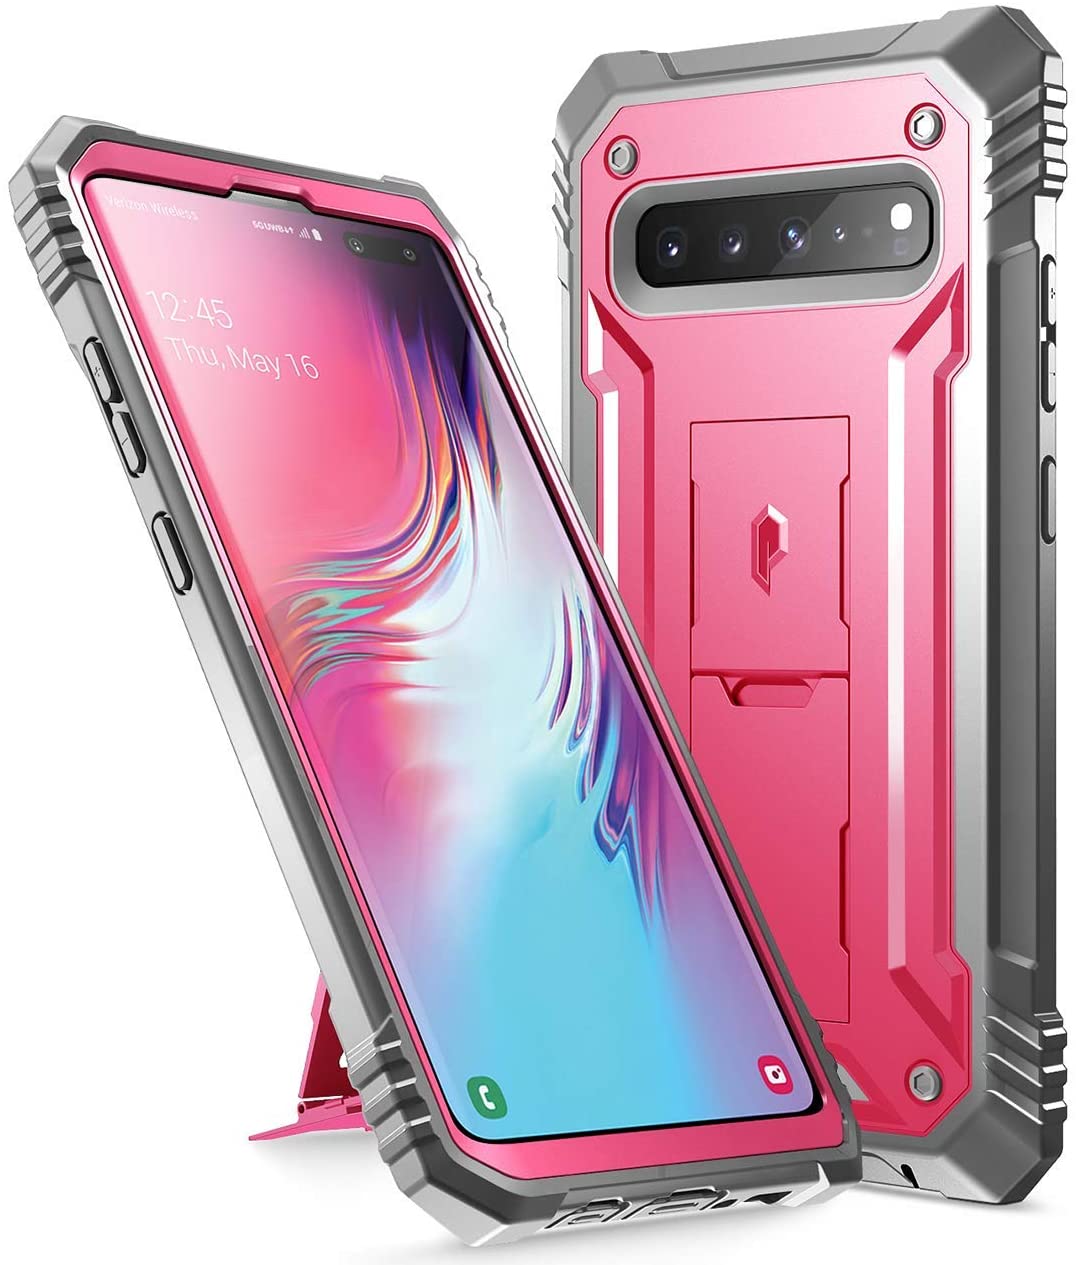 Galaxy S10 5G Rugged Case with Kickstand, Poetic Full-Body Dual-Layer Shockproof Protective Cover - e4cents